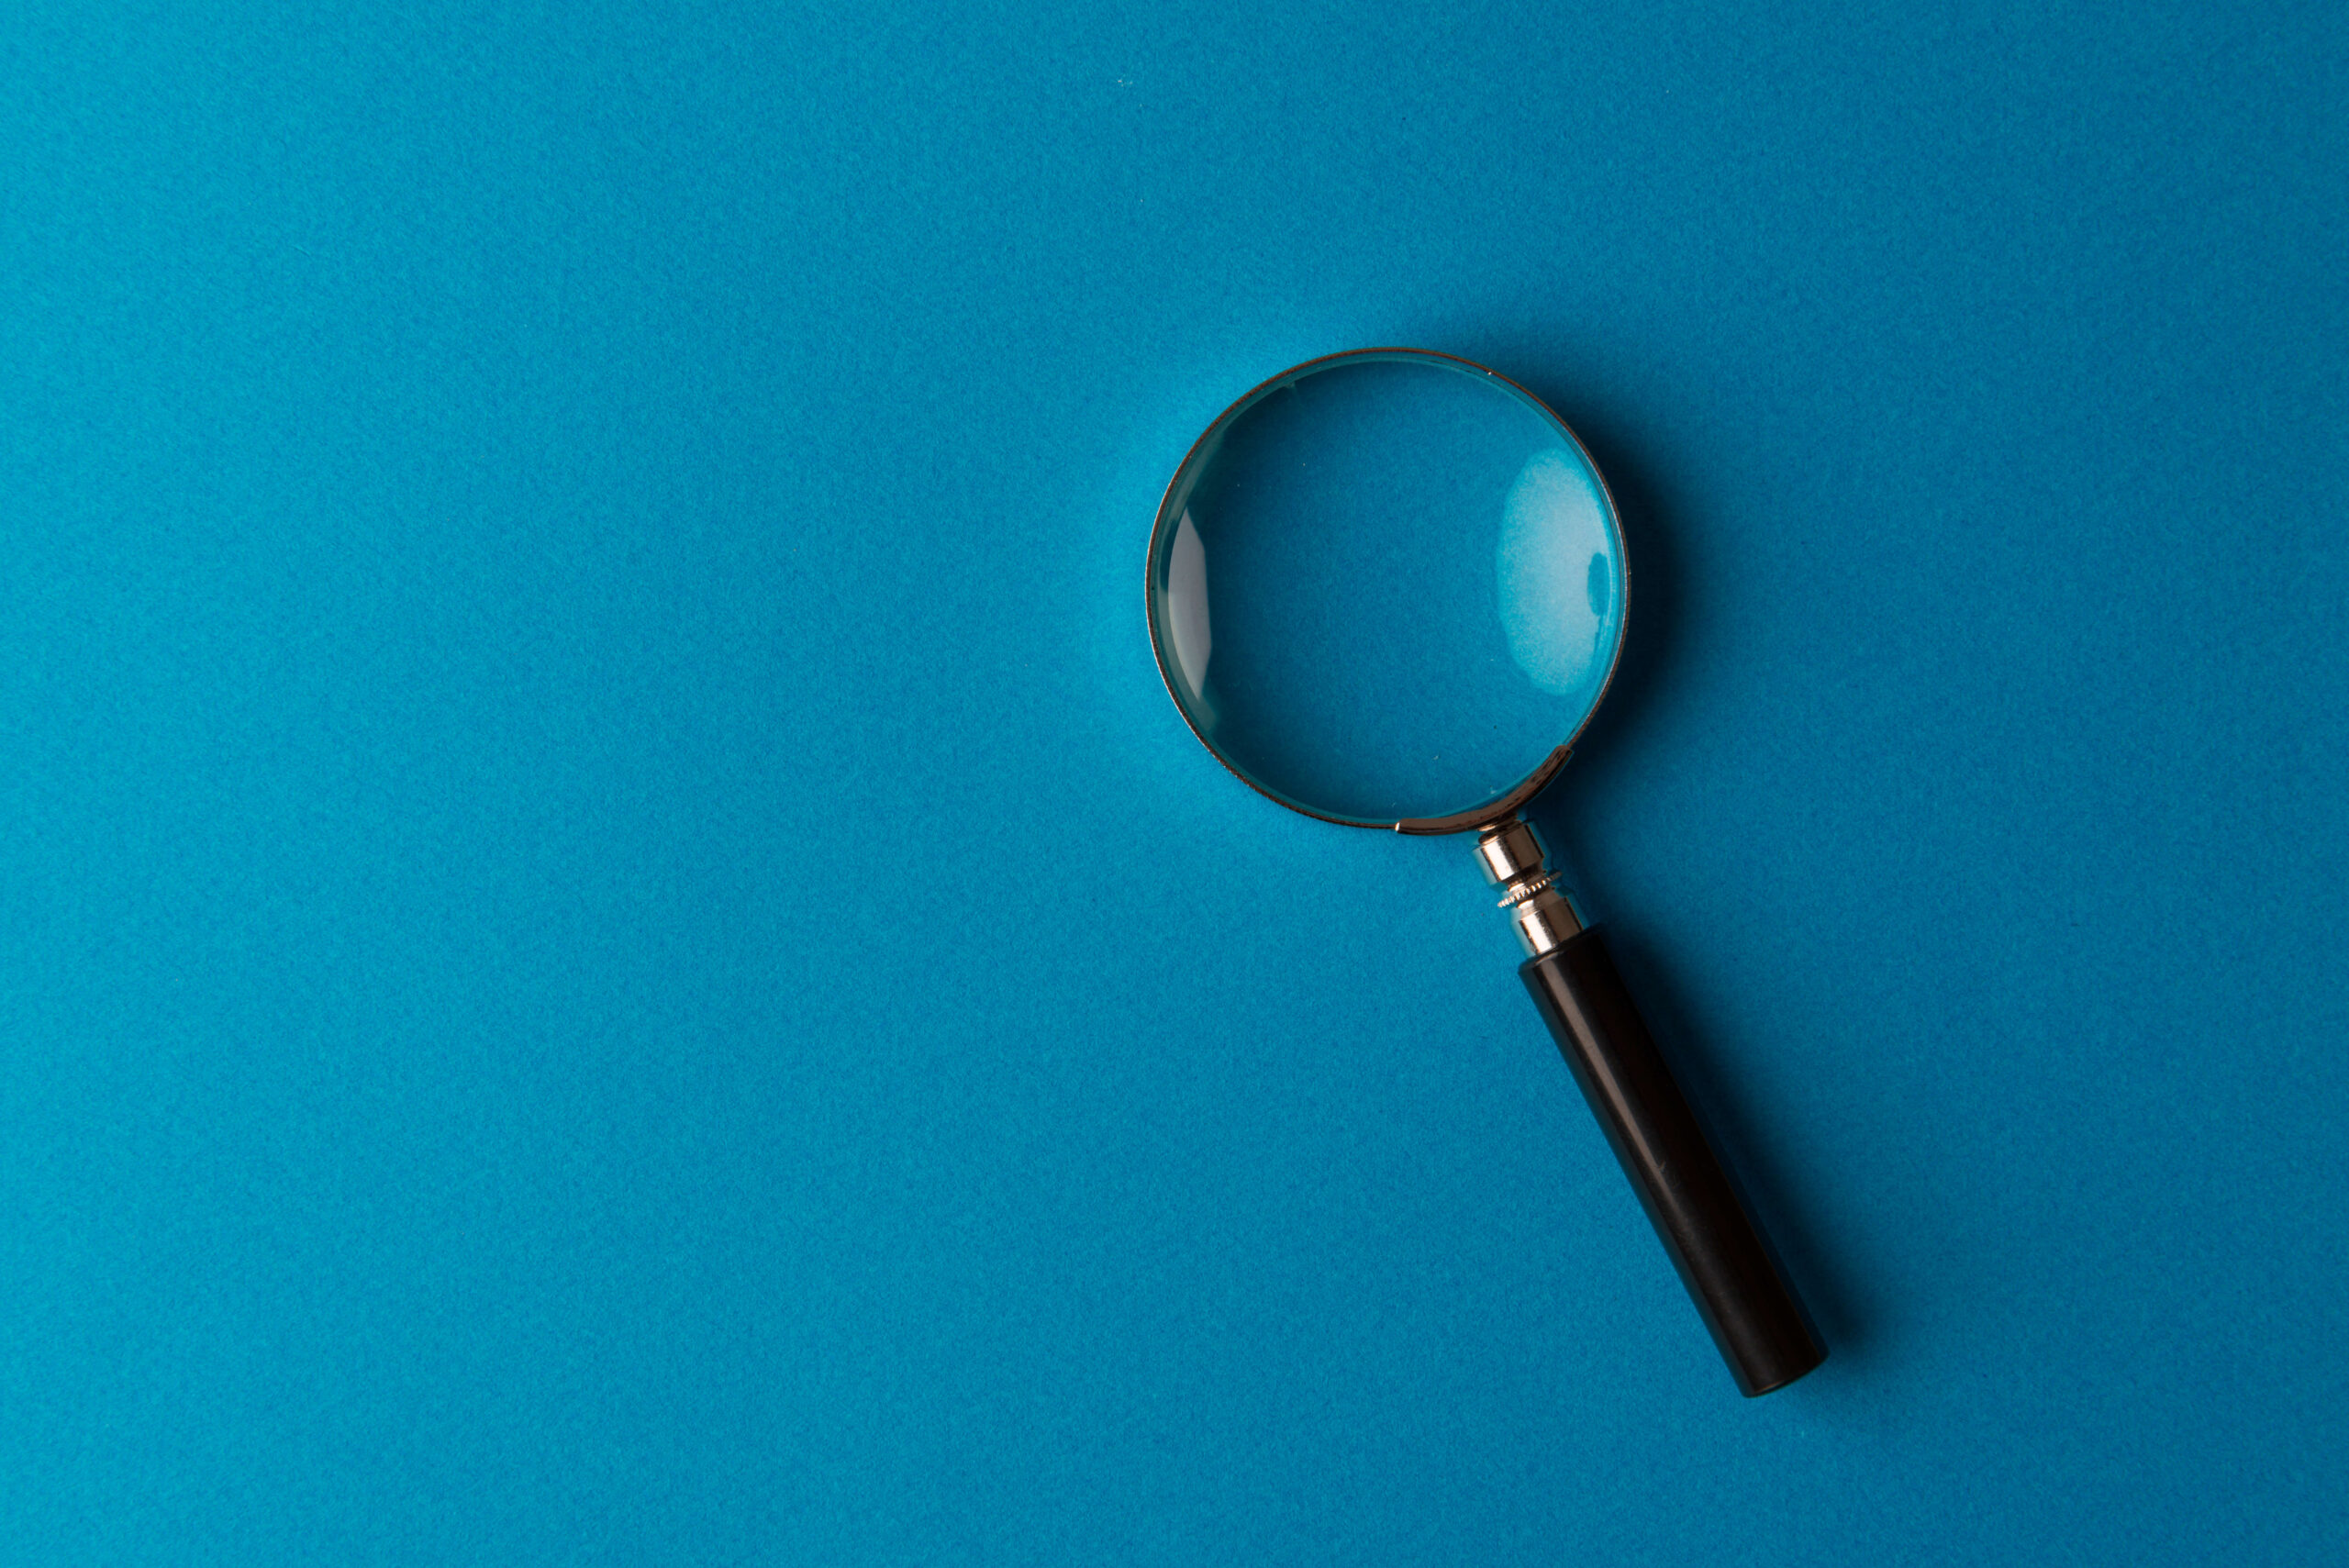 Magnifying glass against teal background.